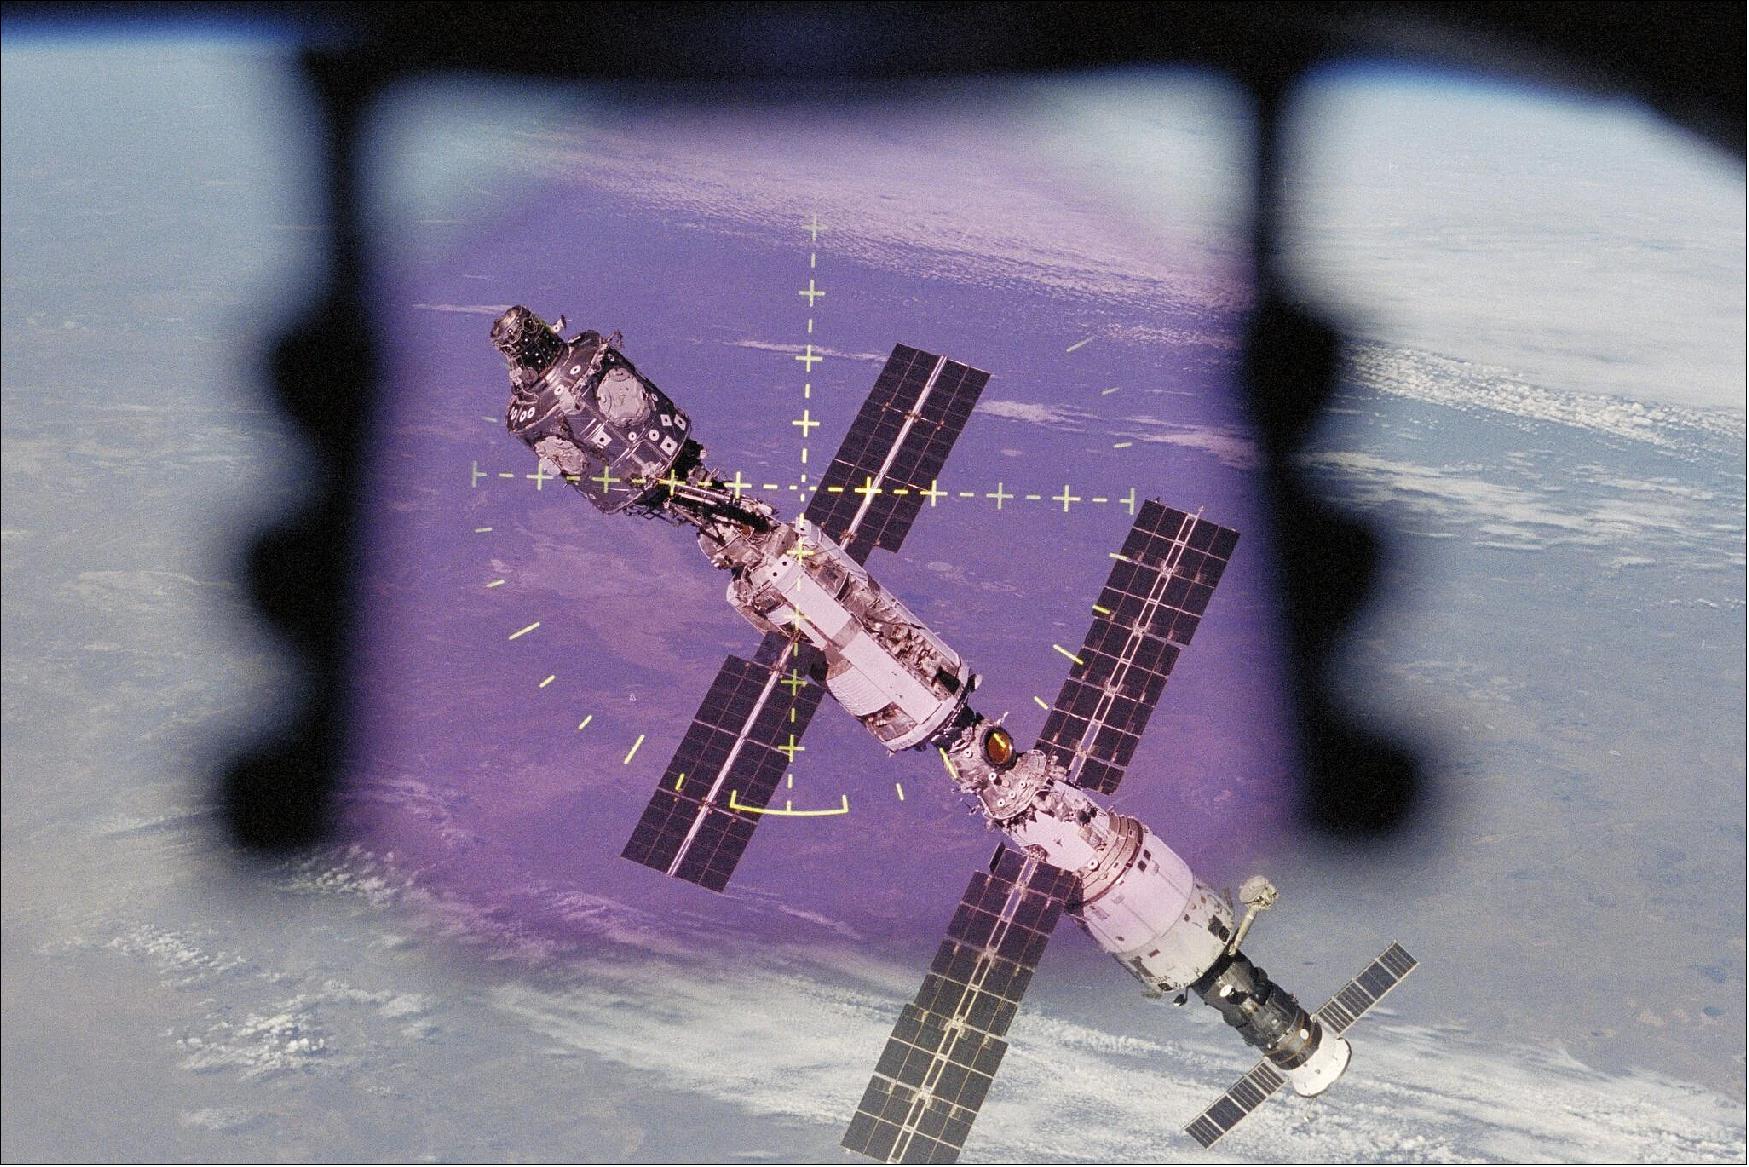 Figure 24: The International Space Station viewed from the Space Shuttle Atlantis’s crew optical alignment system for undocking in September 2000 (image credit: NASA/JSC)